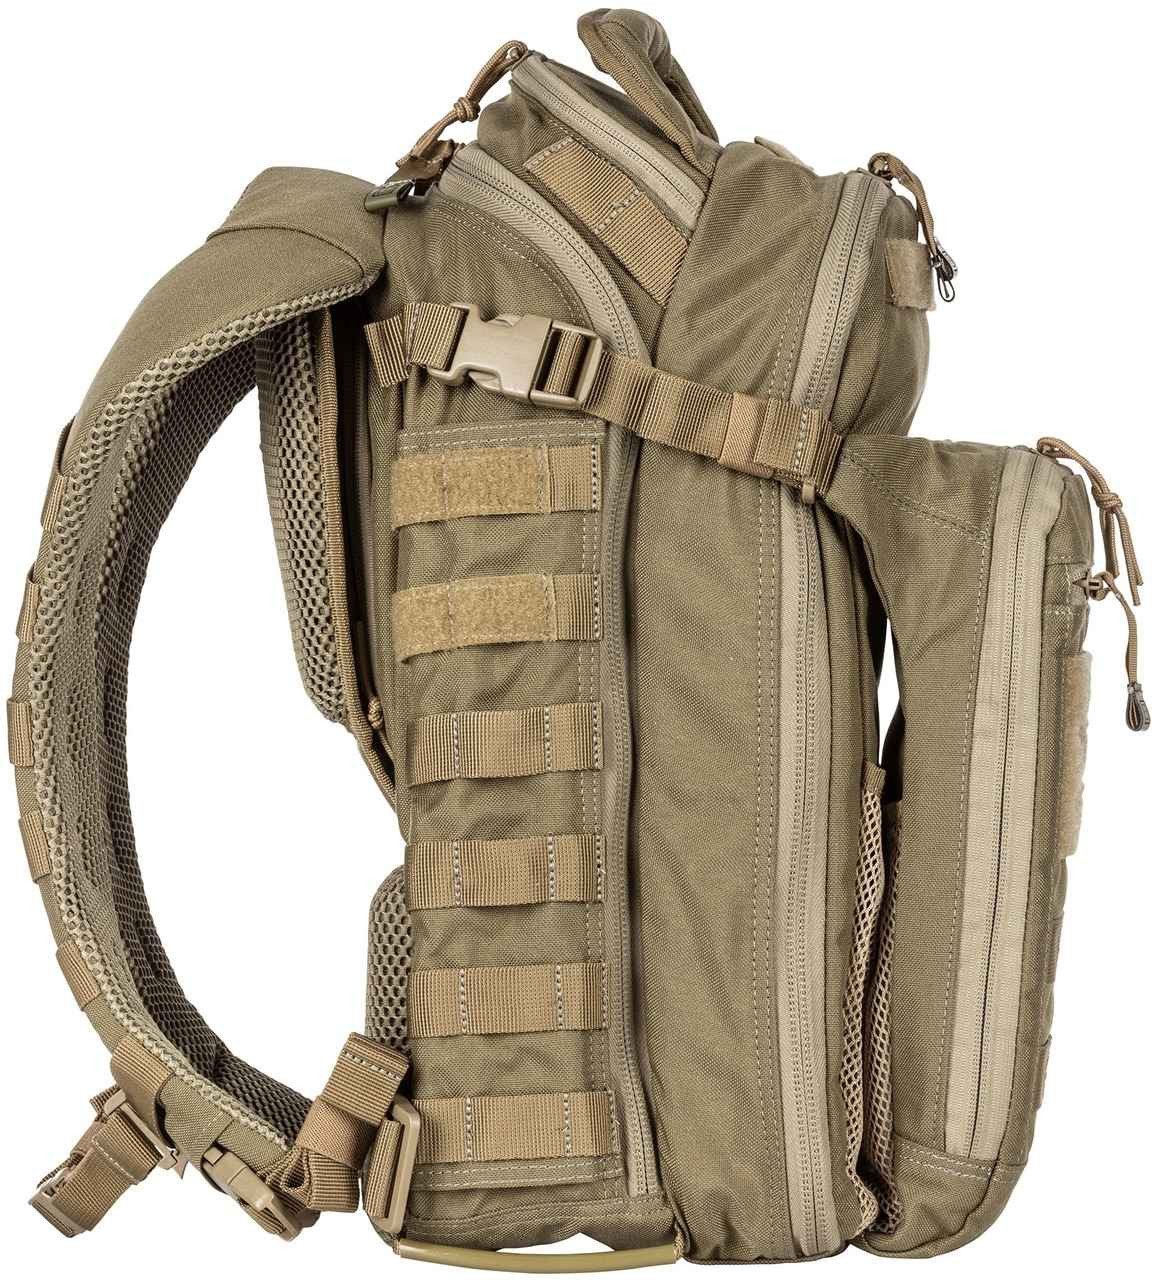 5.11 Tactical 56167 21L All Hazards Nitro Backpack